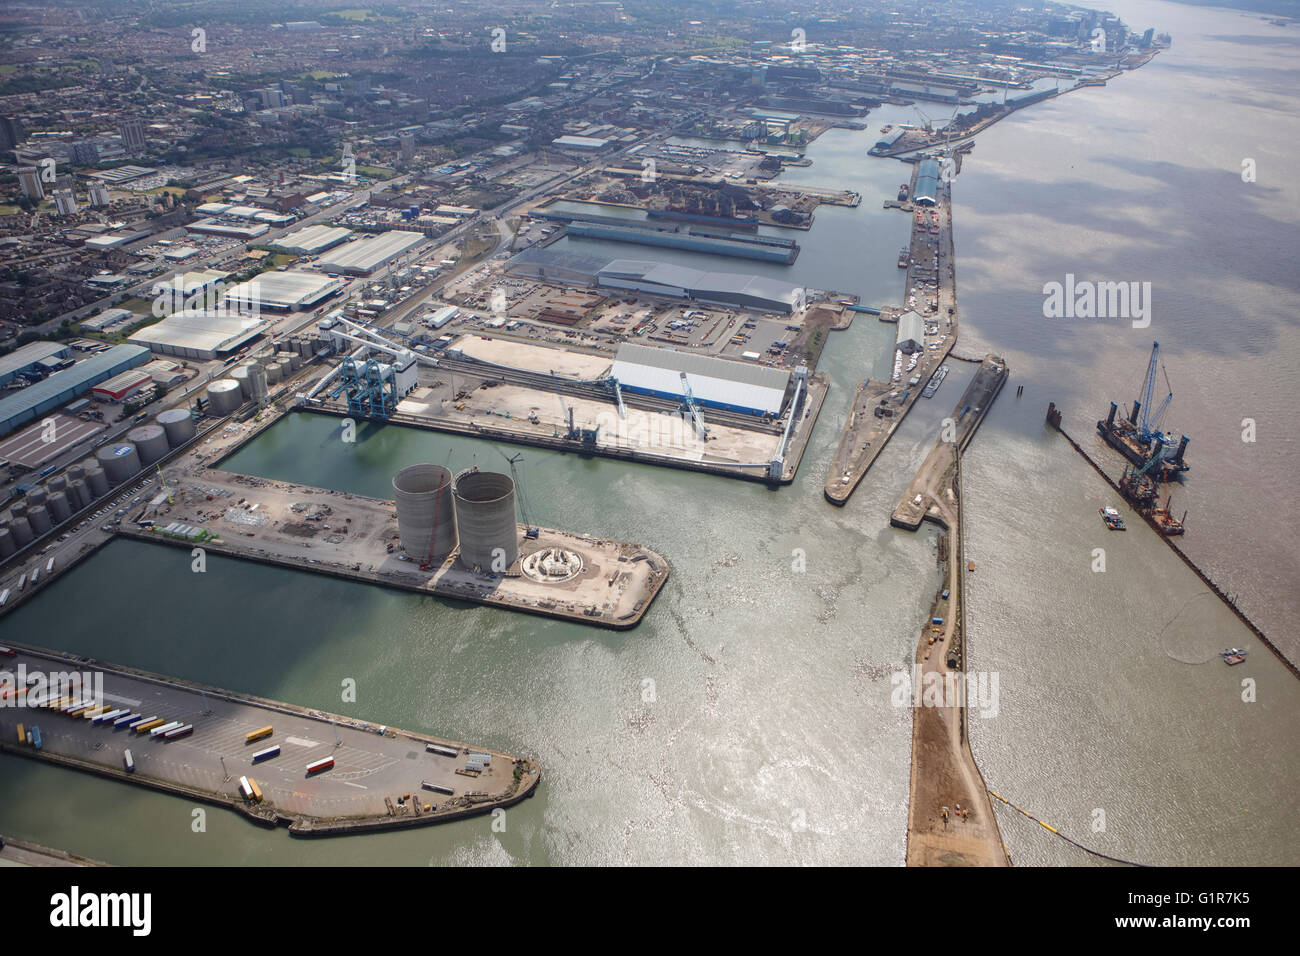 An aerial view of the Seaforth Docks, Port of Liverpool Stock Photo